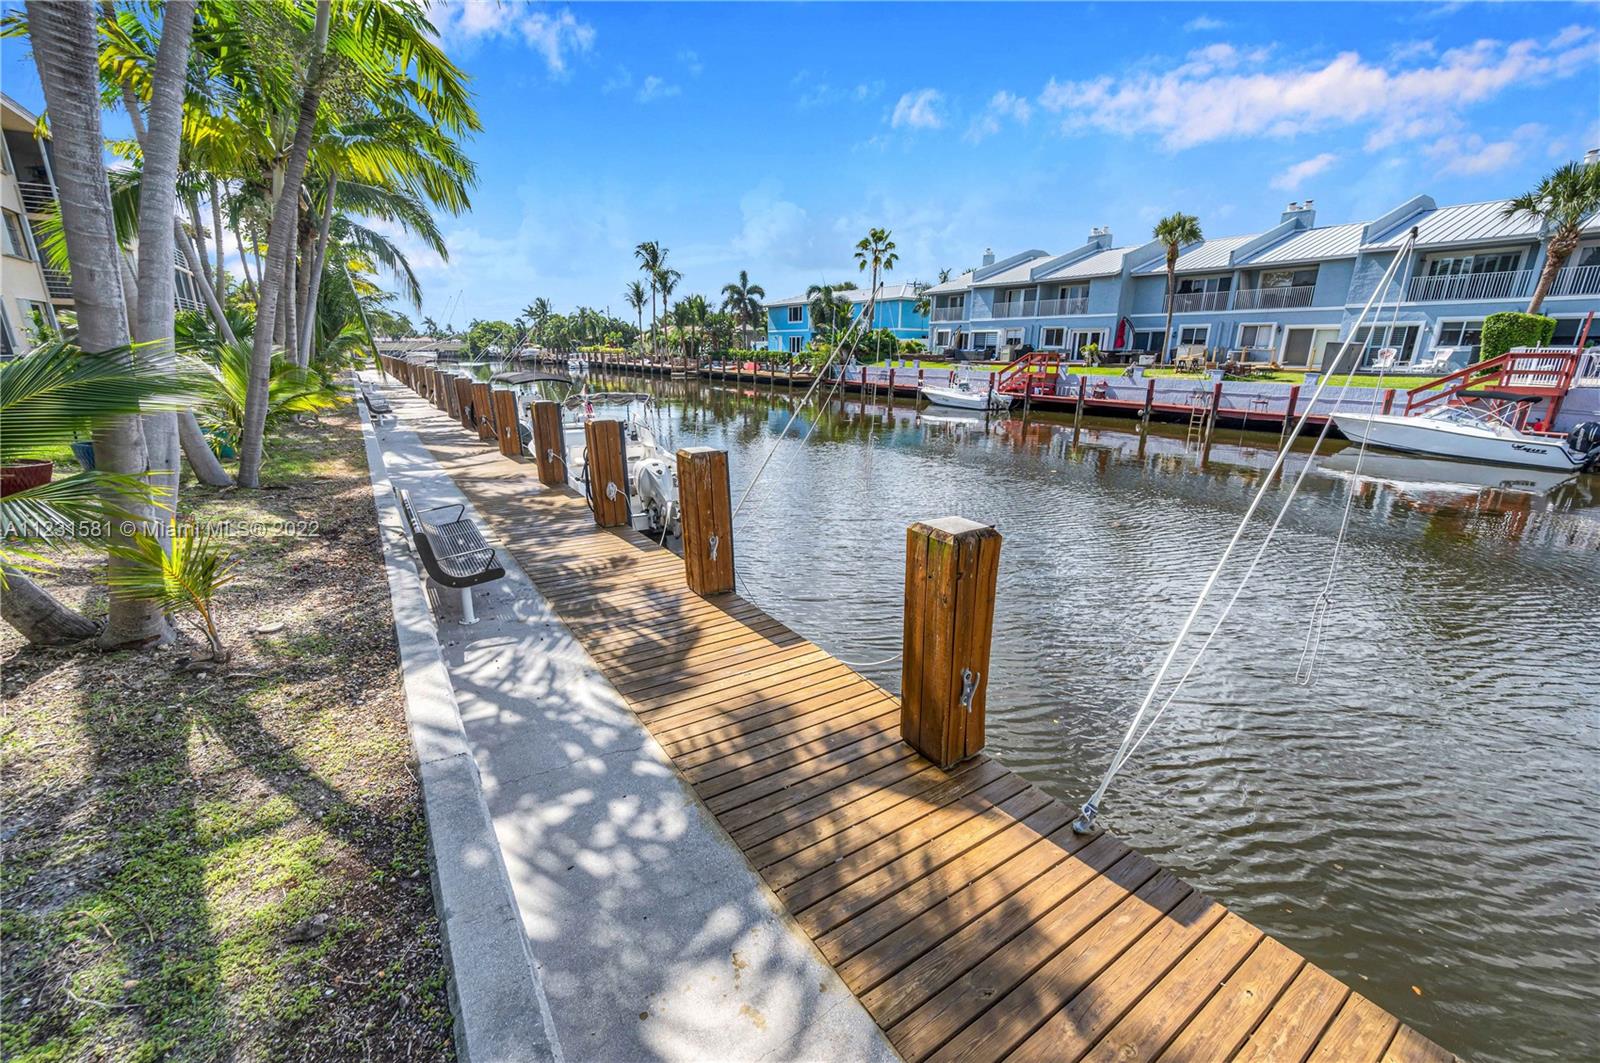 Centrally located condo in the waterways of South Florida. Unit storage, 2 large walk in closets, close to the intercostal and minutes to the beach. All ages welcome. 1 car assigned parking space, elevator, community laundry, clubhouse, fitness center, heated pool, and shuffleboard.